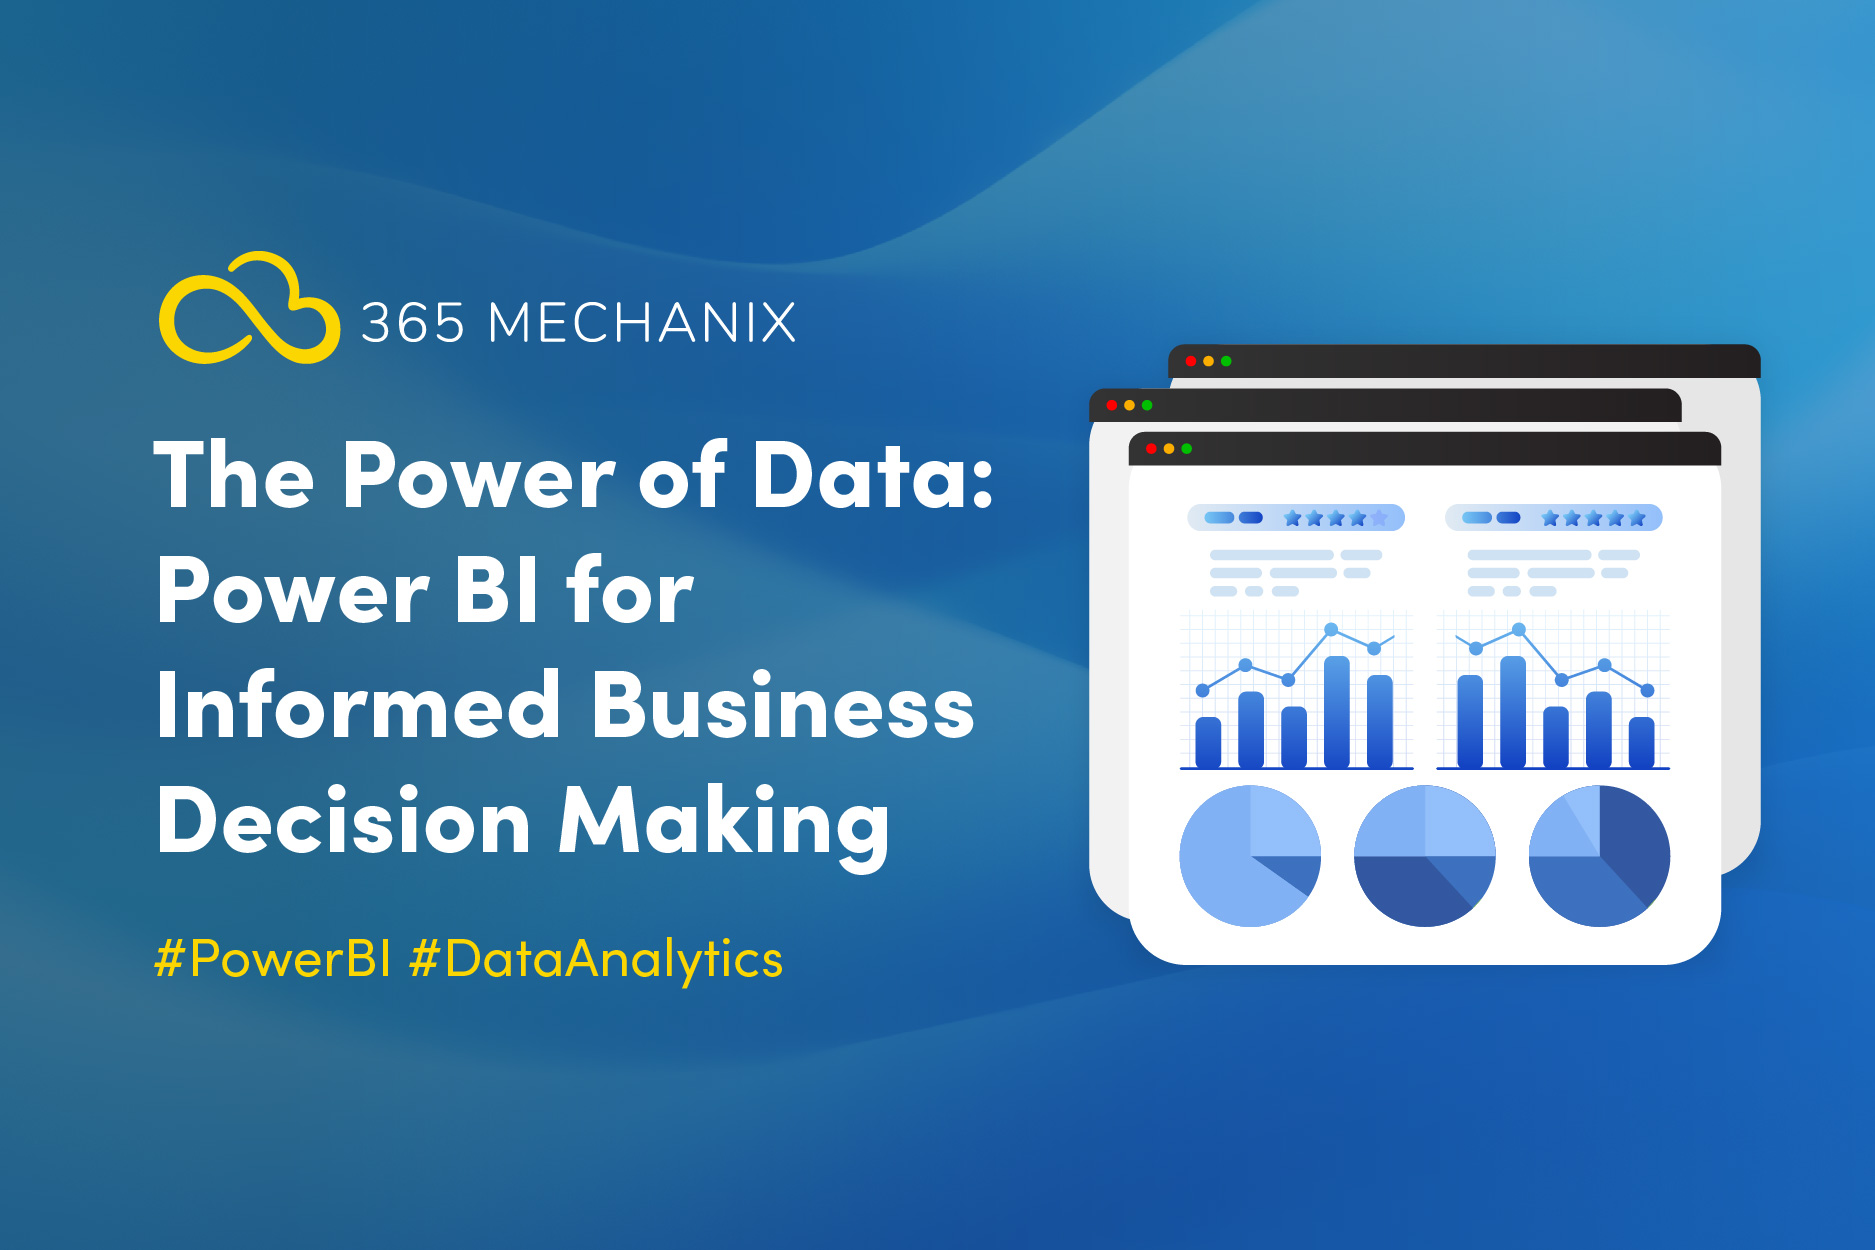 The Power of Data: Power BI for Informed Business Decision Making